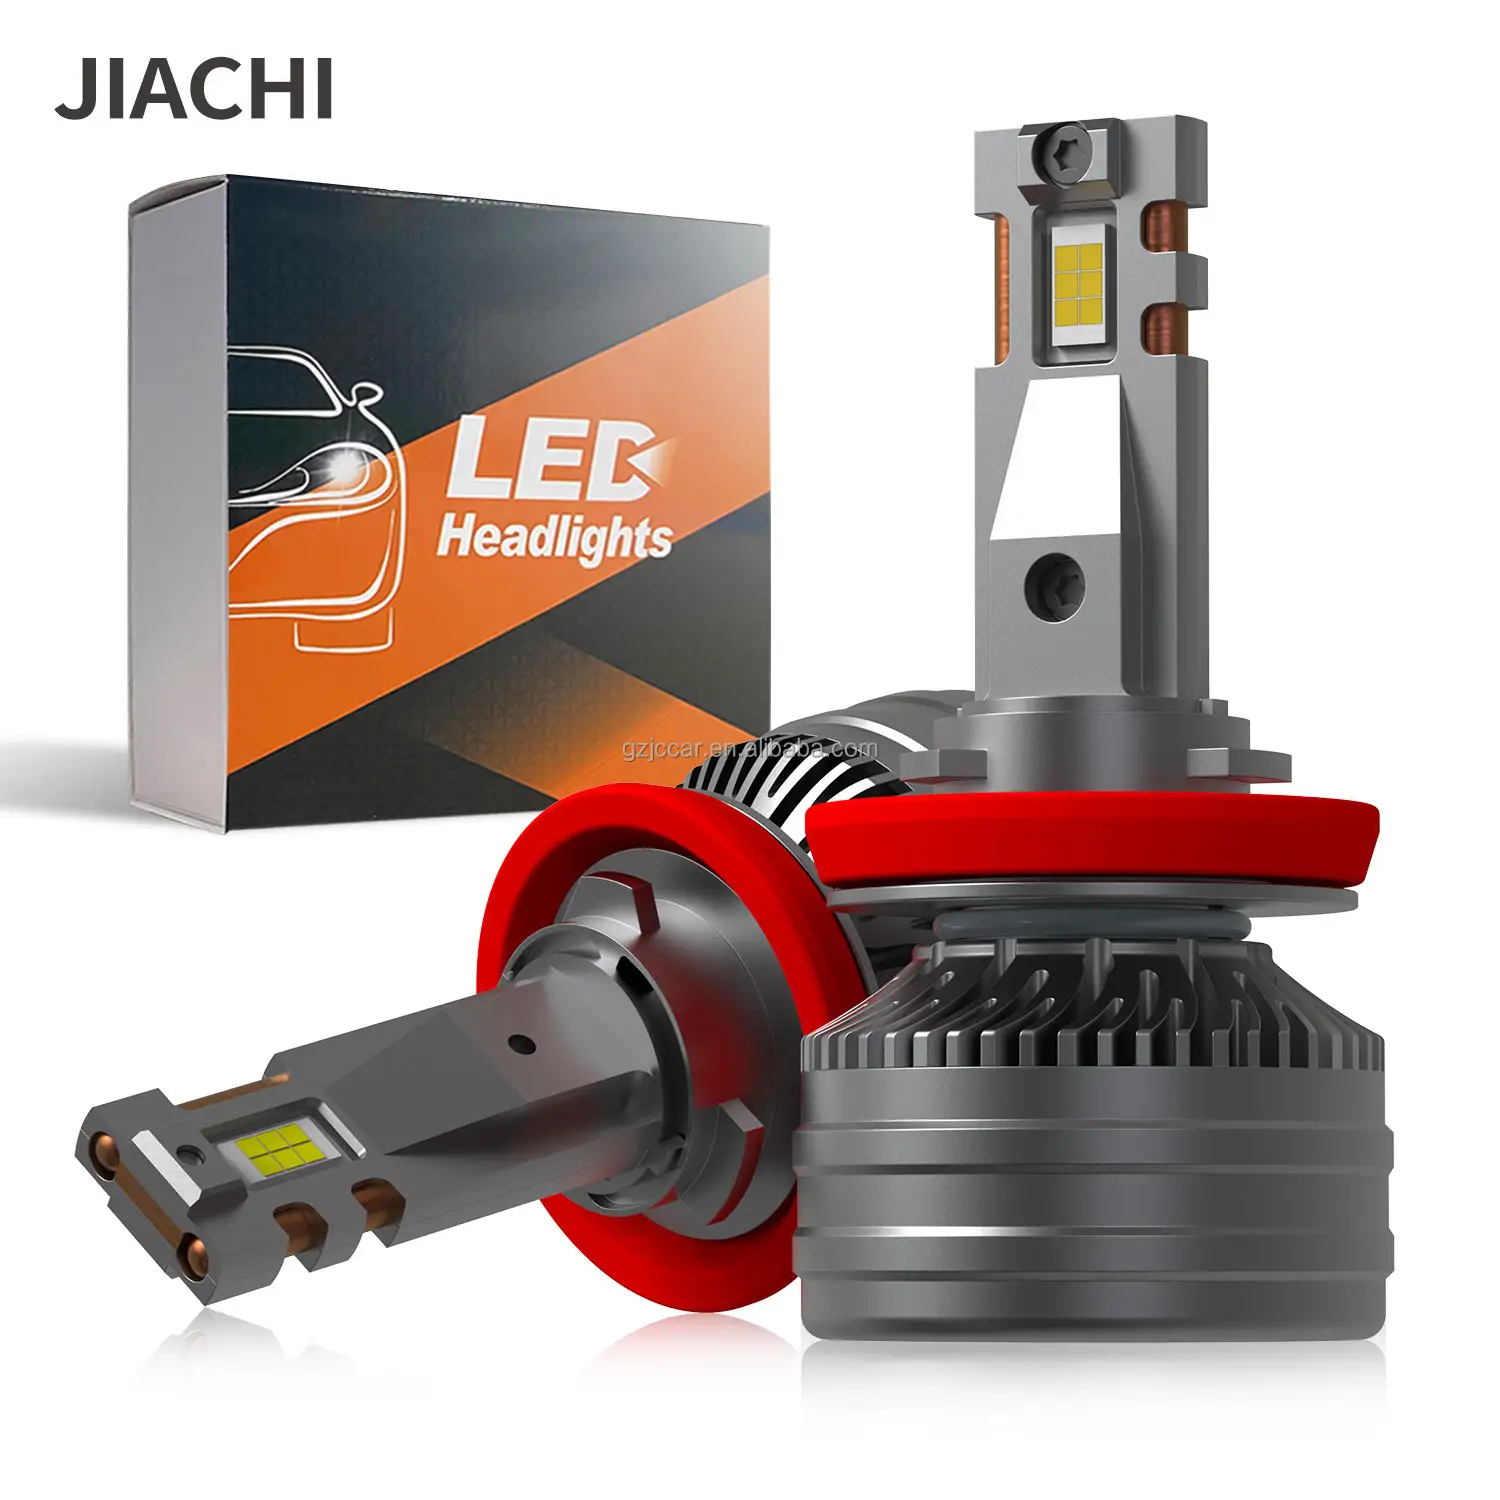 JIACHI FACTORY Wholesale Brightest Led Headlights High Low Beam Lighting H11 H7 Canbus 12V 55W 10000LM 6500K Aluminum Universal